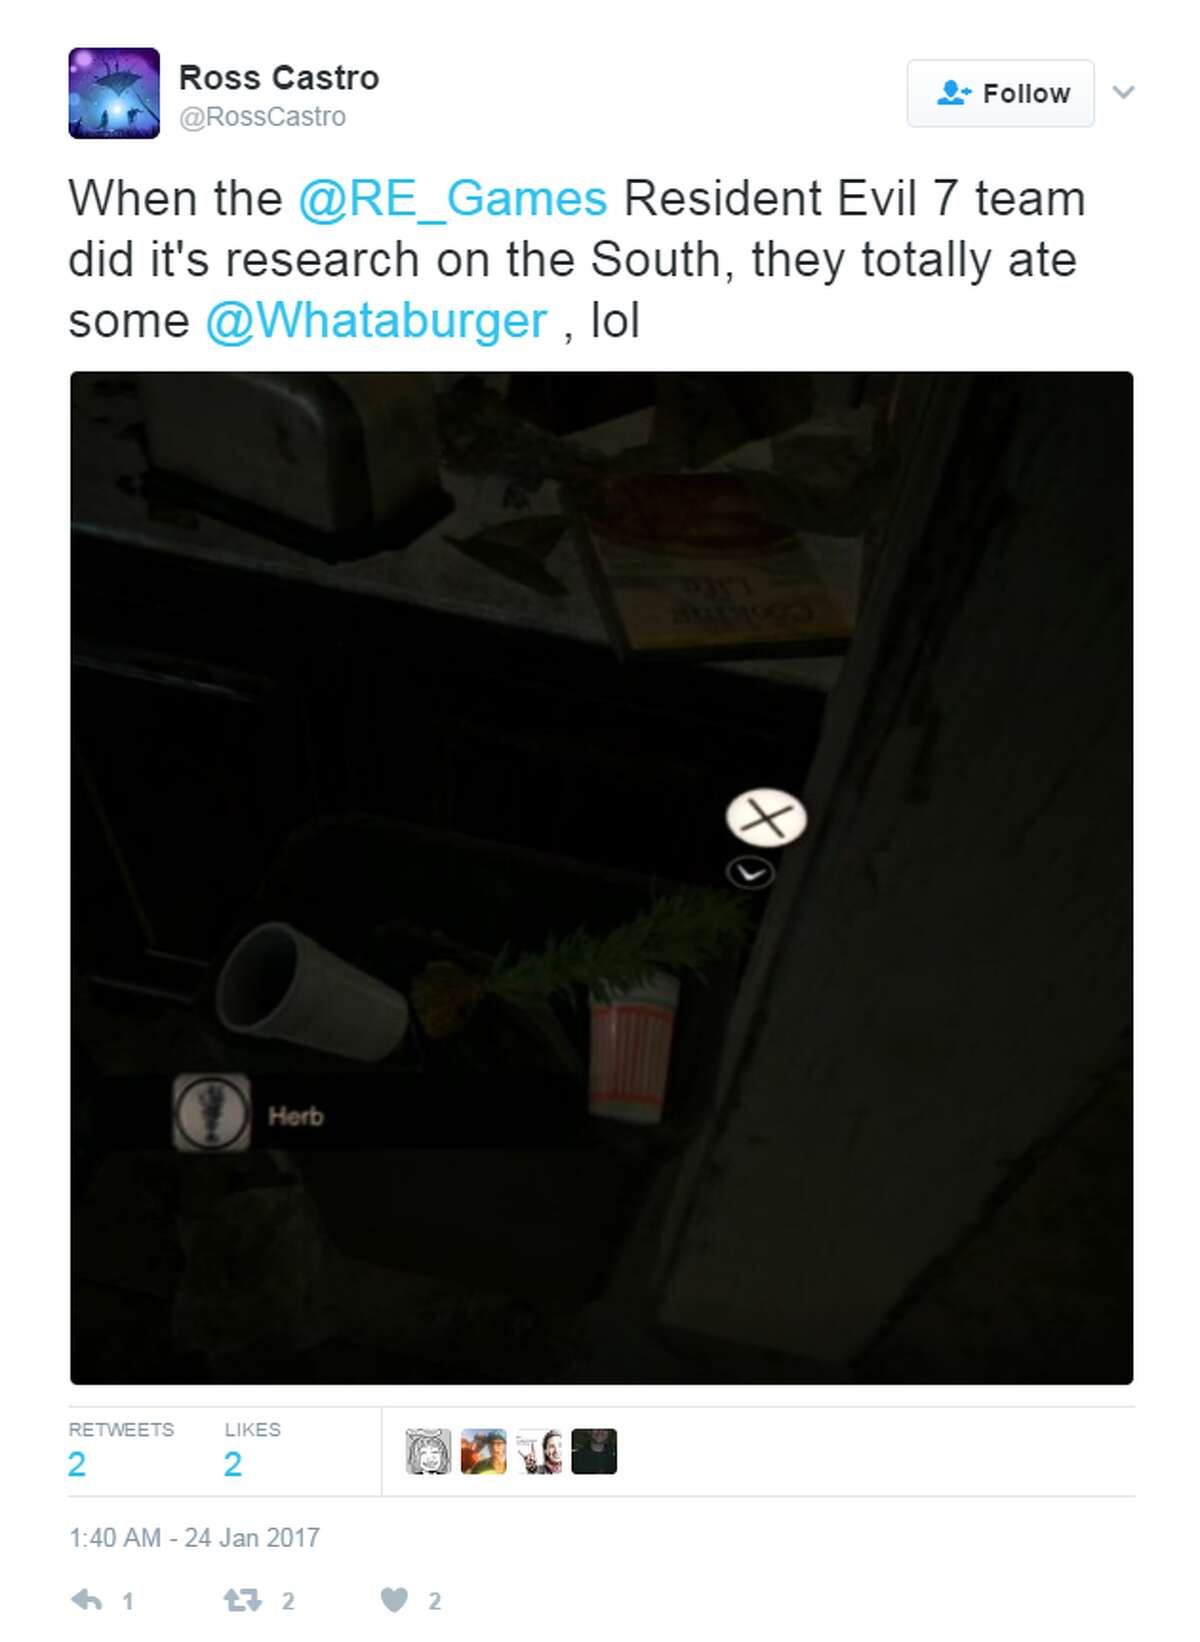 @RossCastro: When the @RE_Games Resident Evil 7 team did it's research on the South, they totally ate some @Whataburger , lol